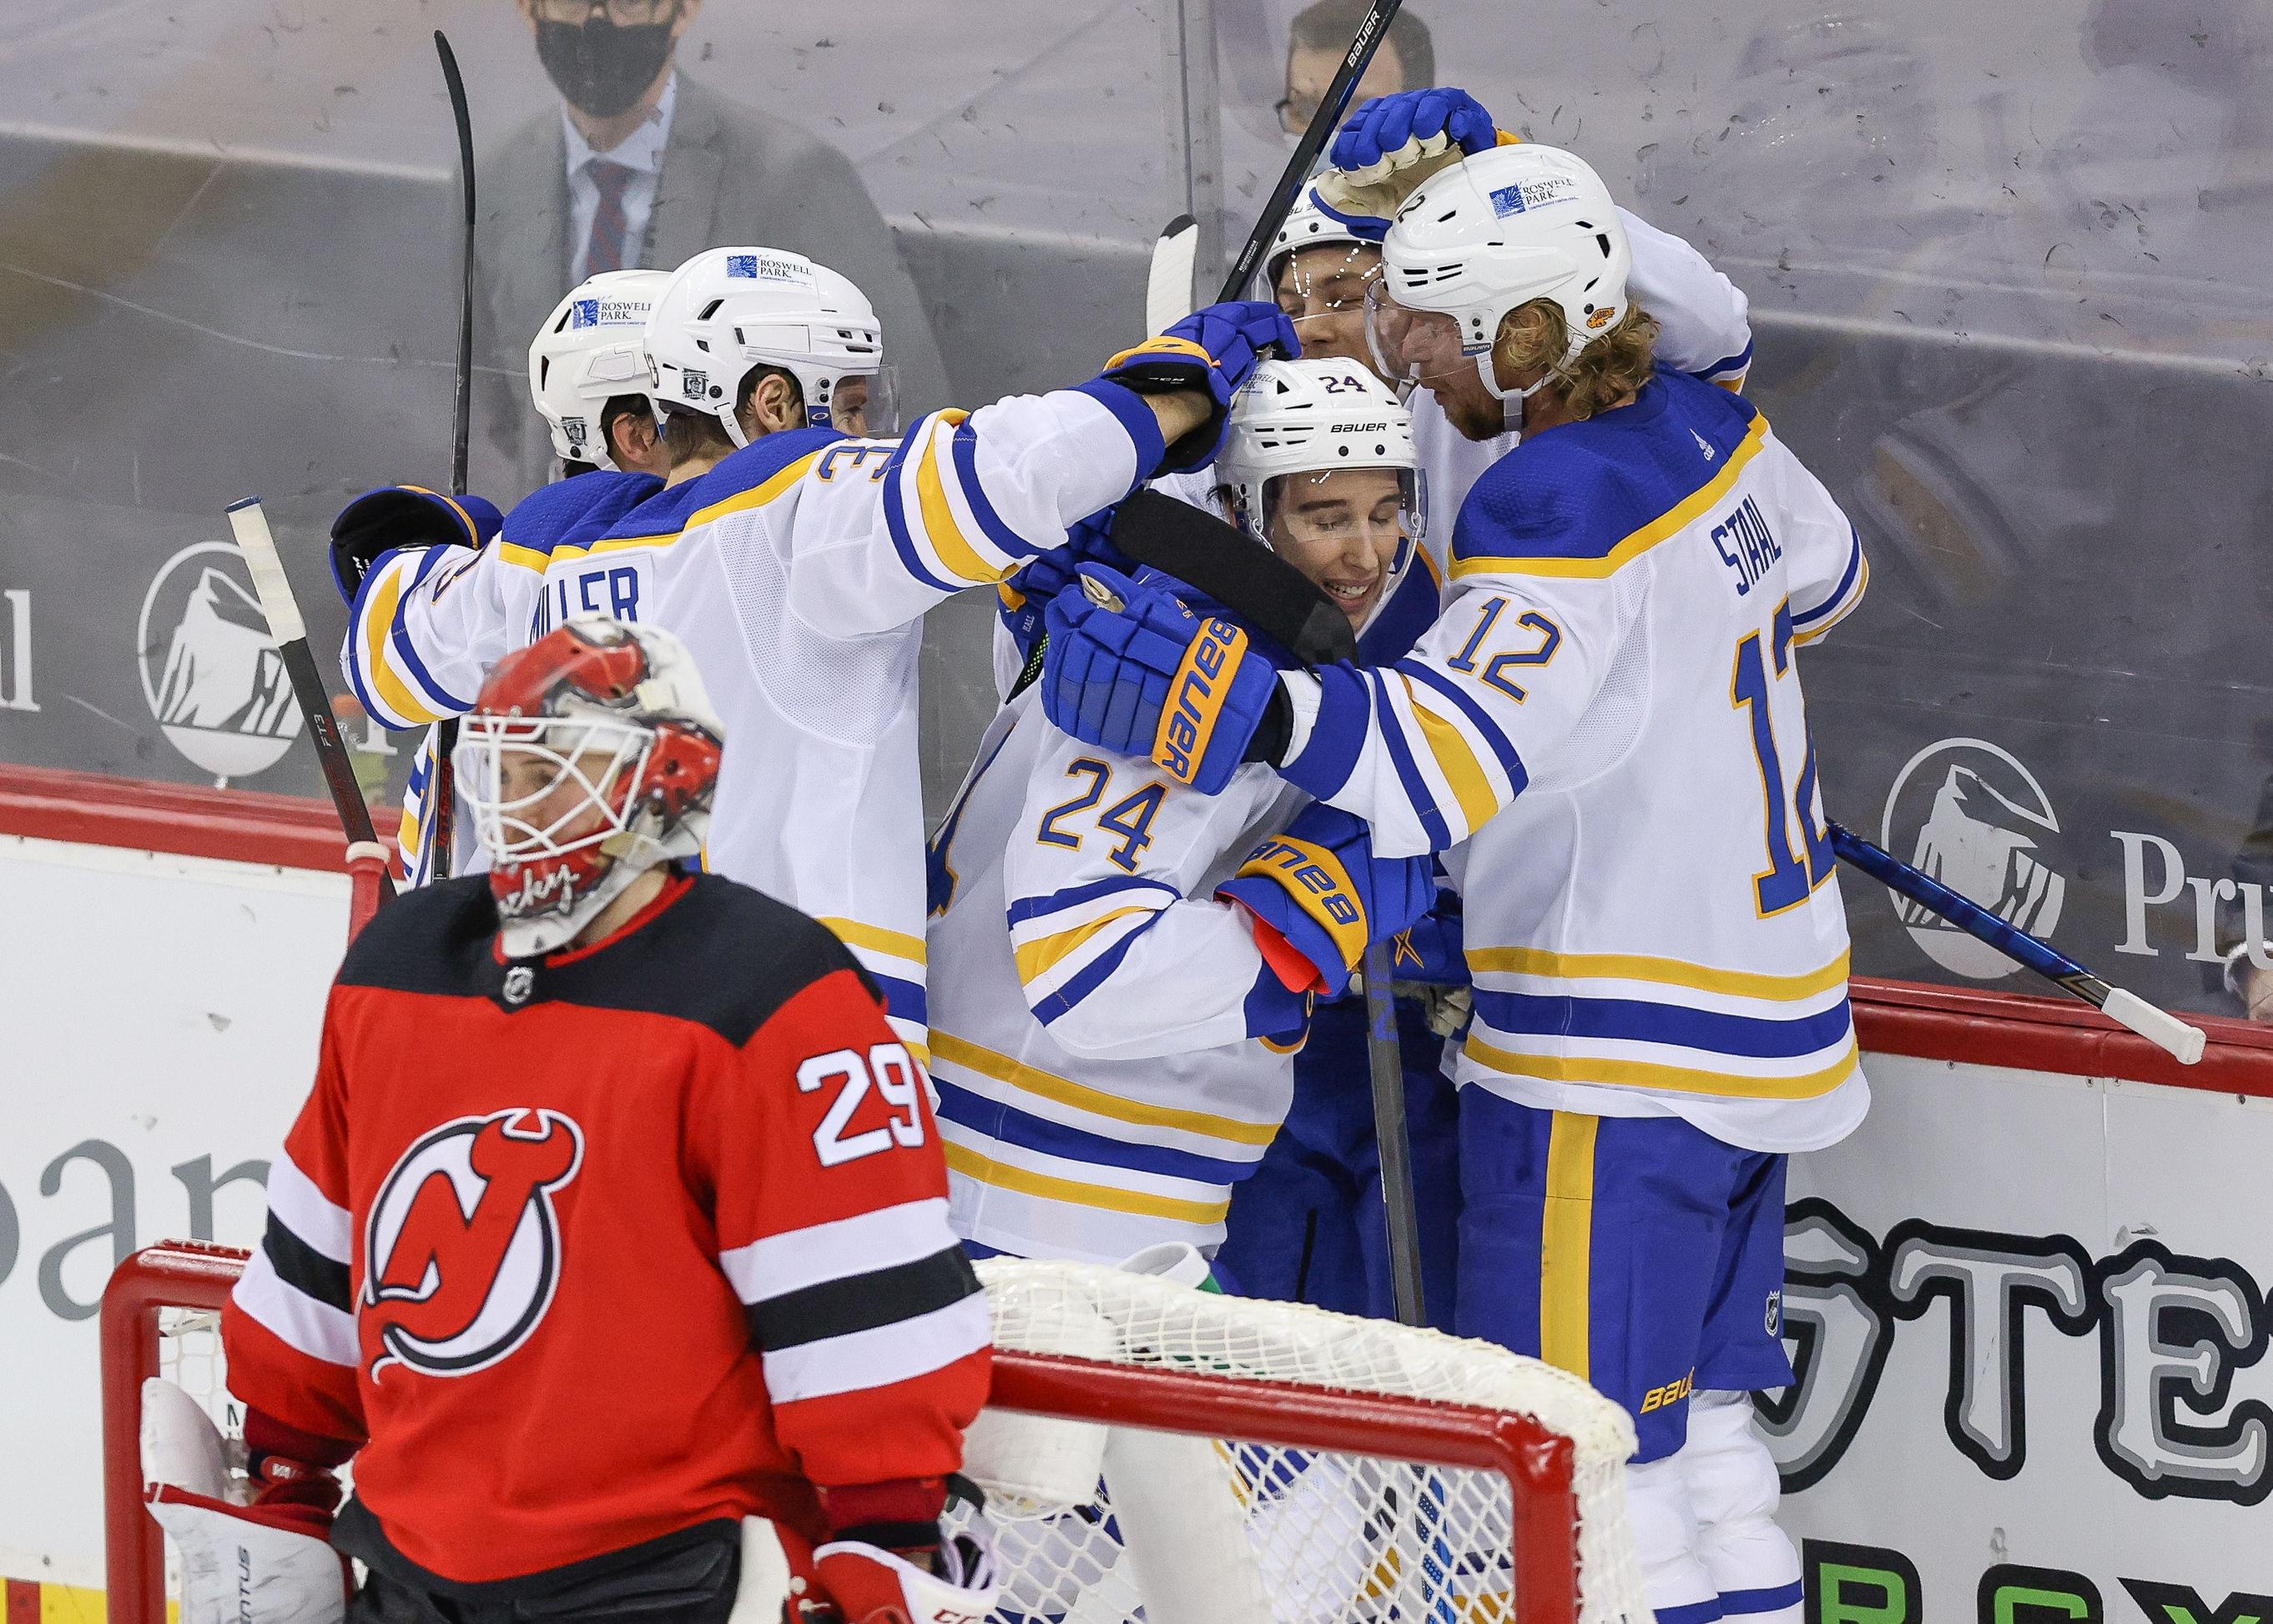 Feb 23, 2021; Newark, New Jersey, USA; Buffalo Sabres center Dylan Cozens (24) celebrates his goal past New Jersey Devils goaltender Mackenzie Blackwood (29) with teammates during the third period at Prudential Center. / © Vincent Carchietta-USA TODAY Sports